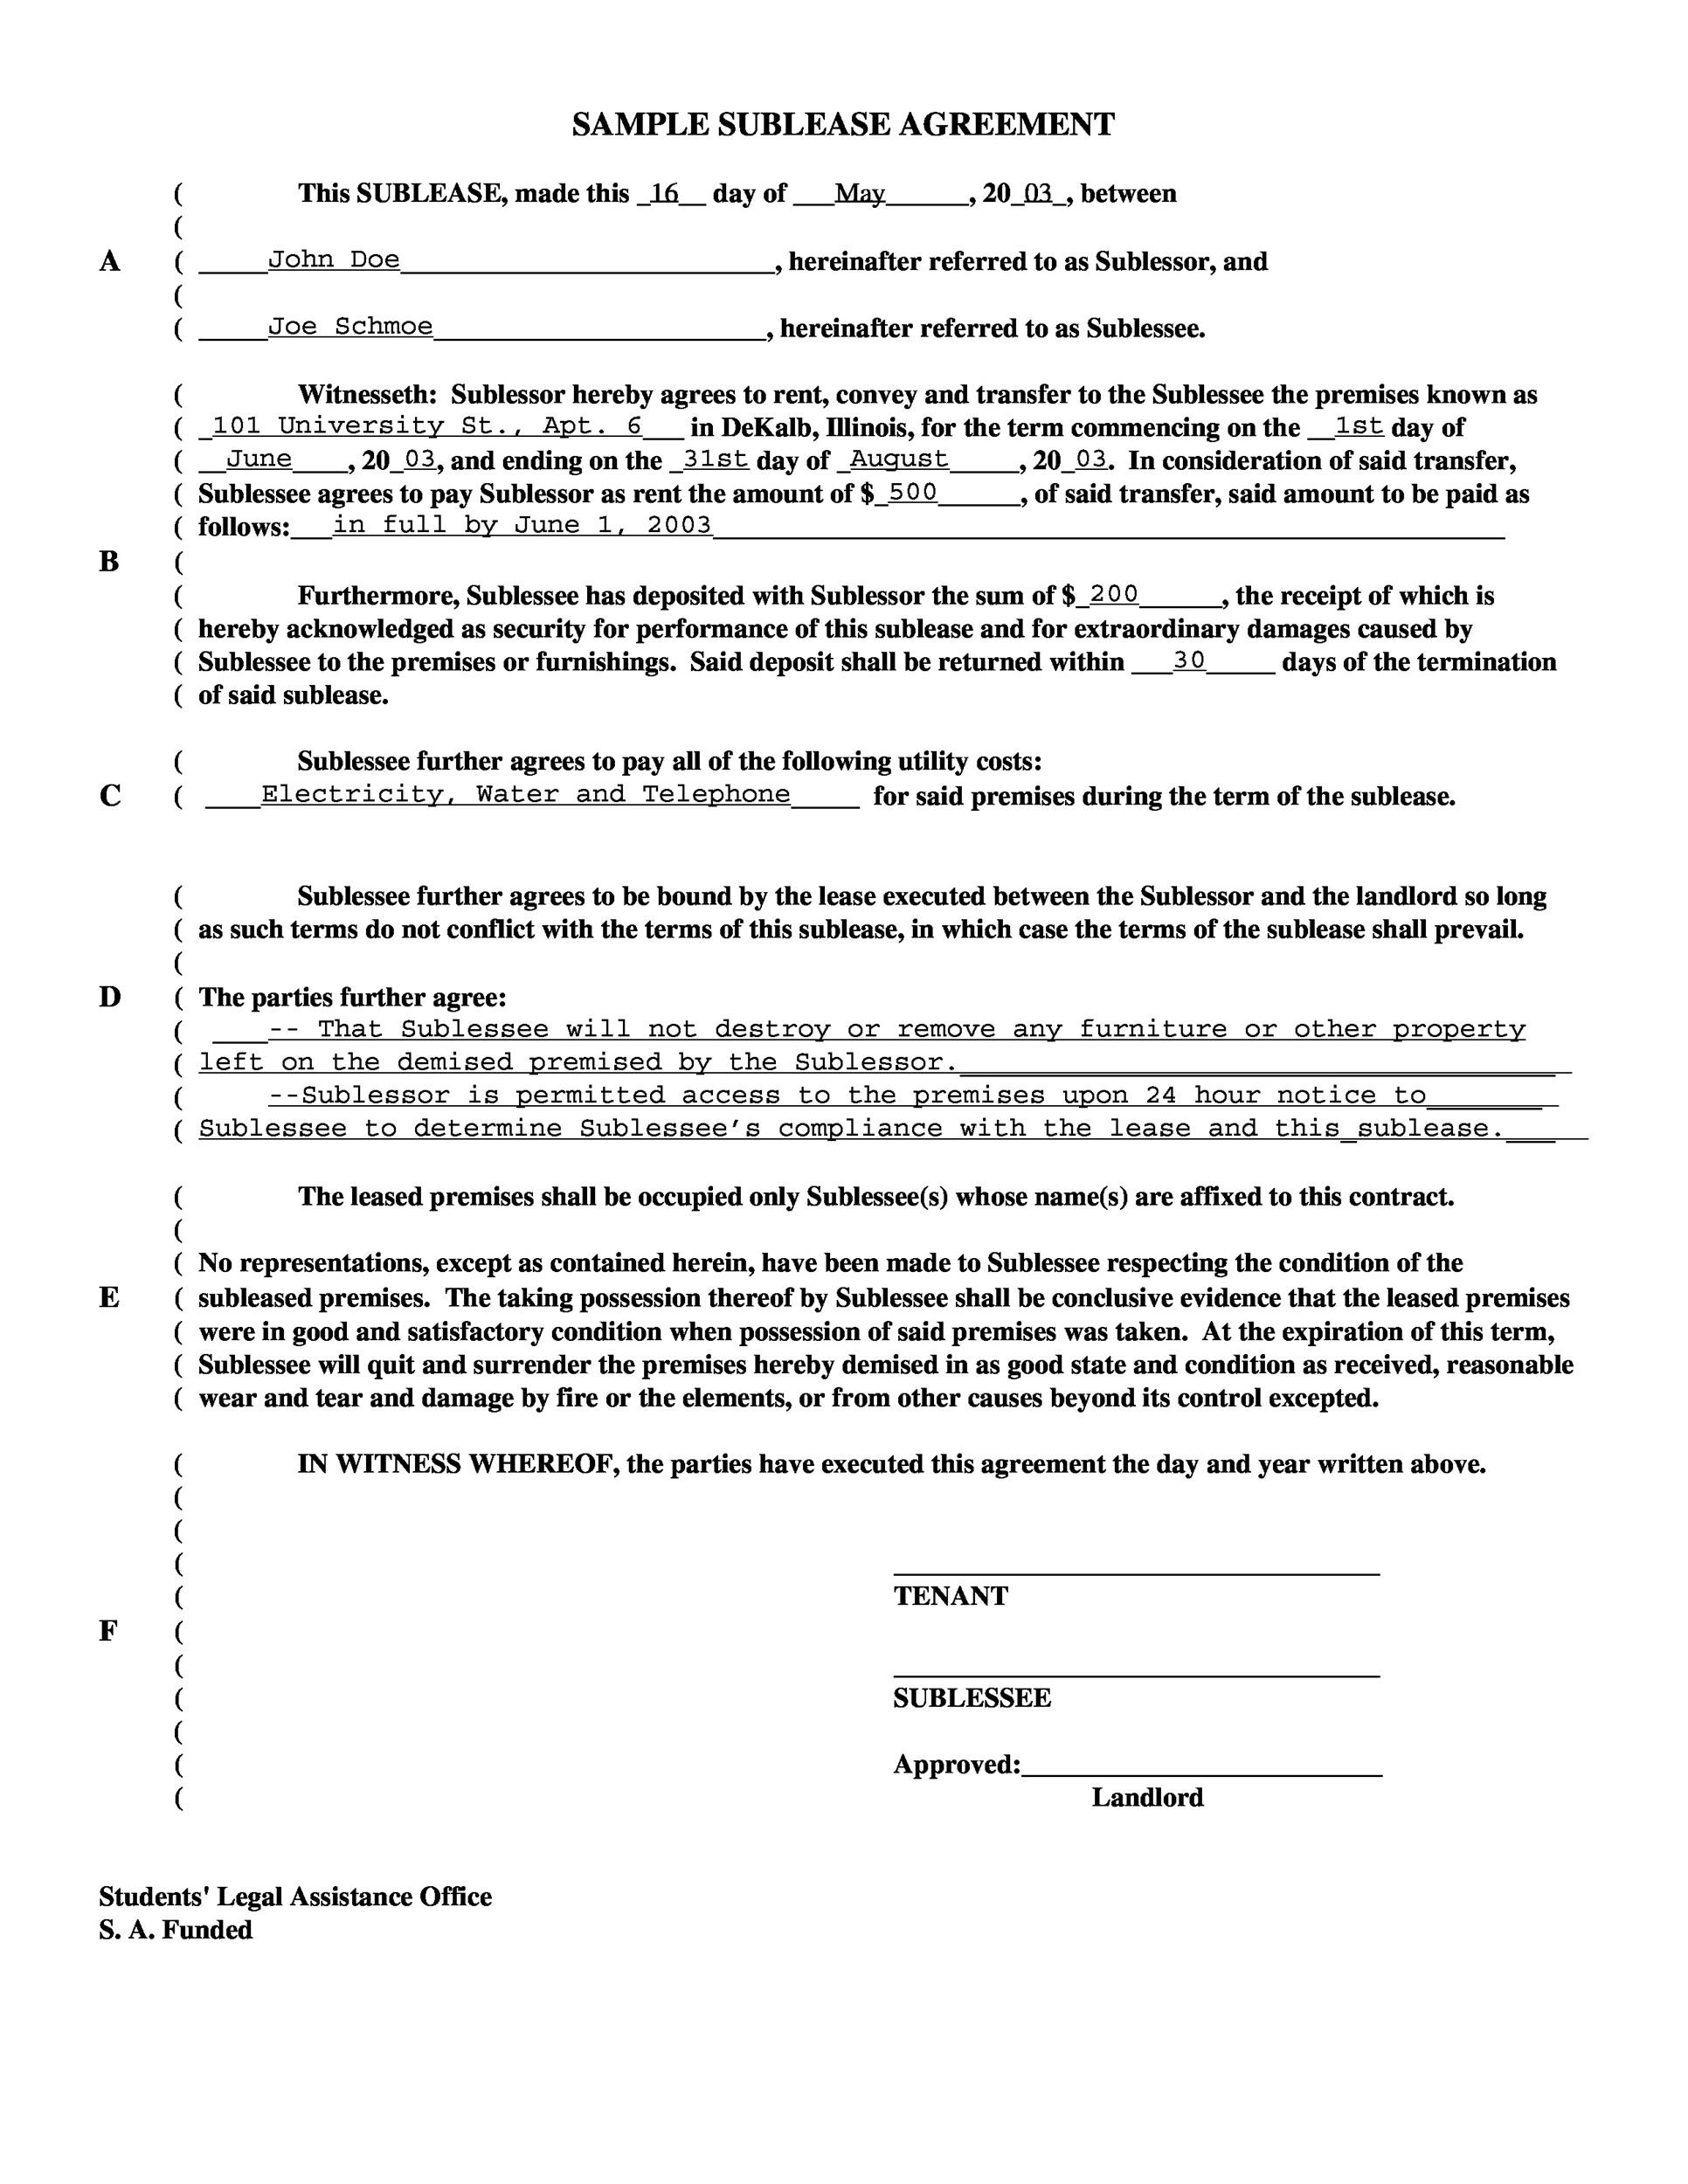 40  Professional Sublease Agreement Templates Forms ᐅ TemplateLab